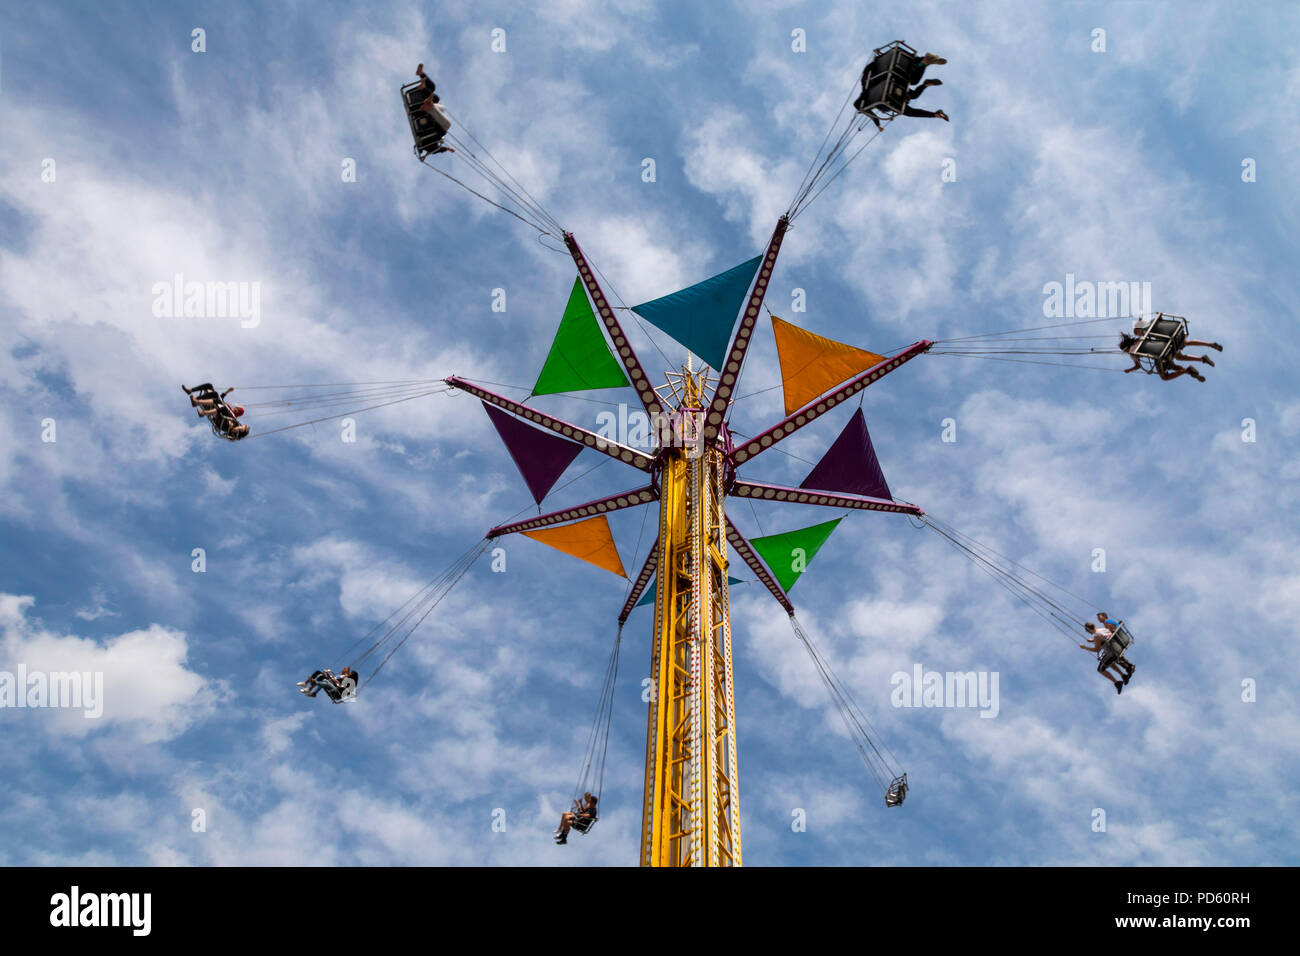 Dearborn, Michigan - The carnival swing ride at the annual Dearborn homecoming festival. Stock Photo